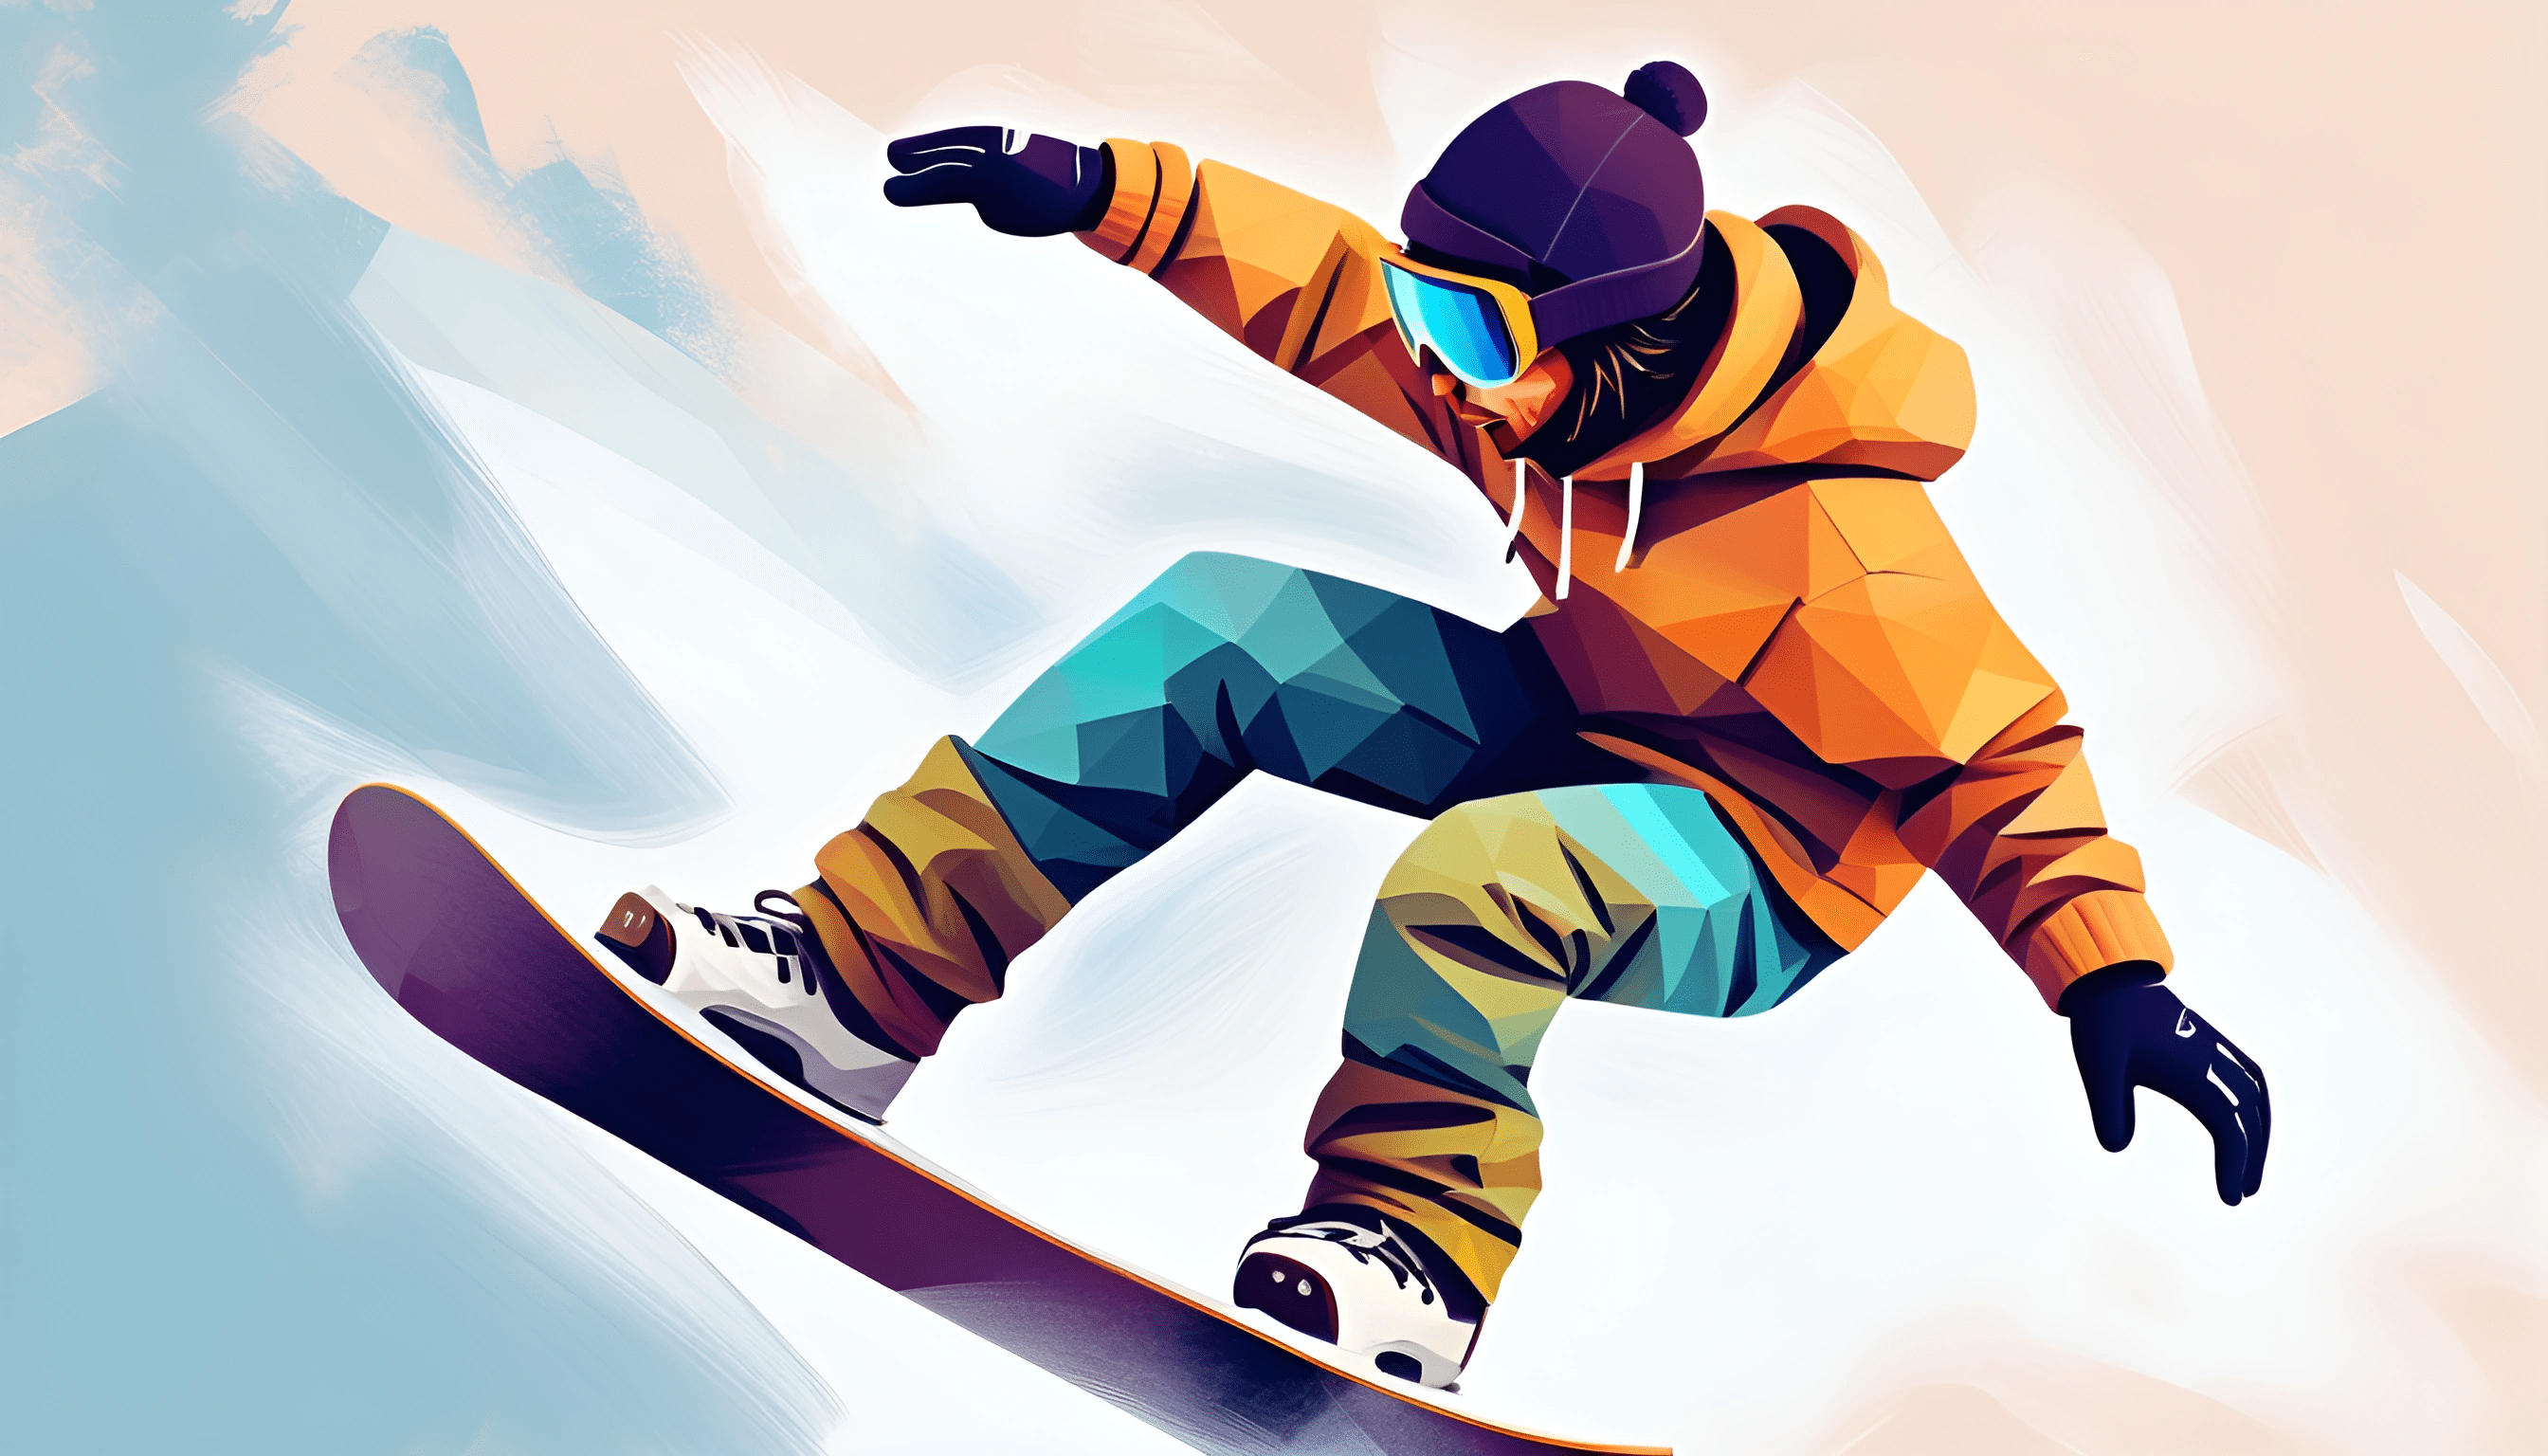 brightly colored illustration of a snowboarder in mid air